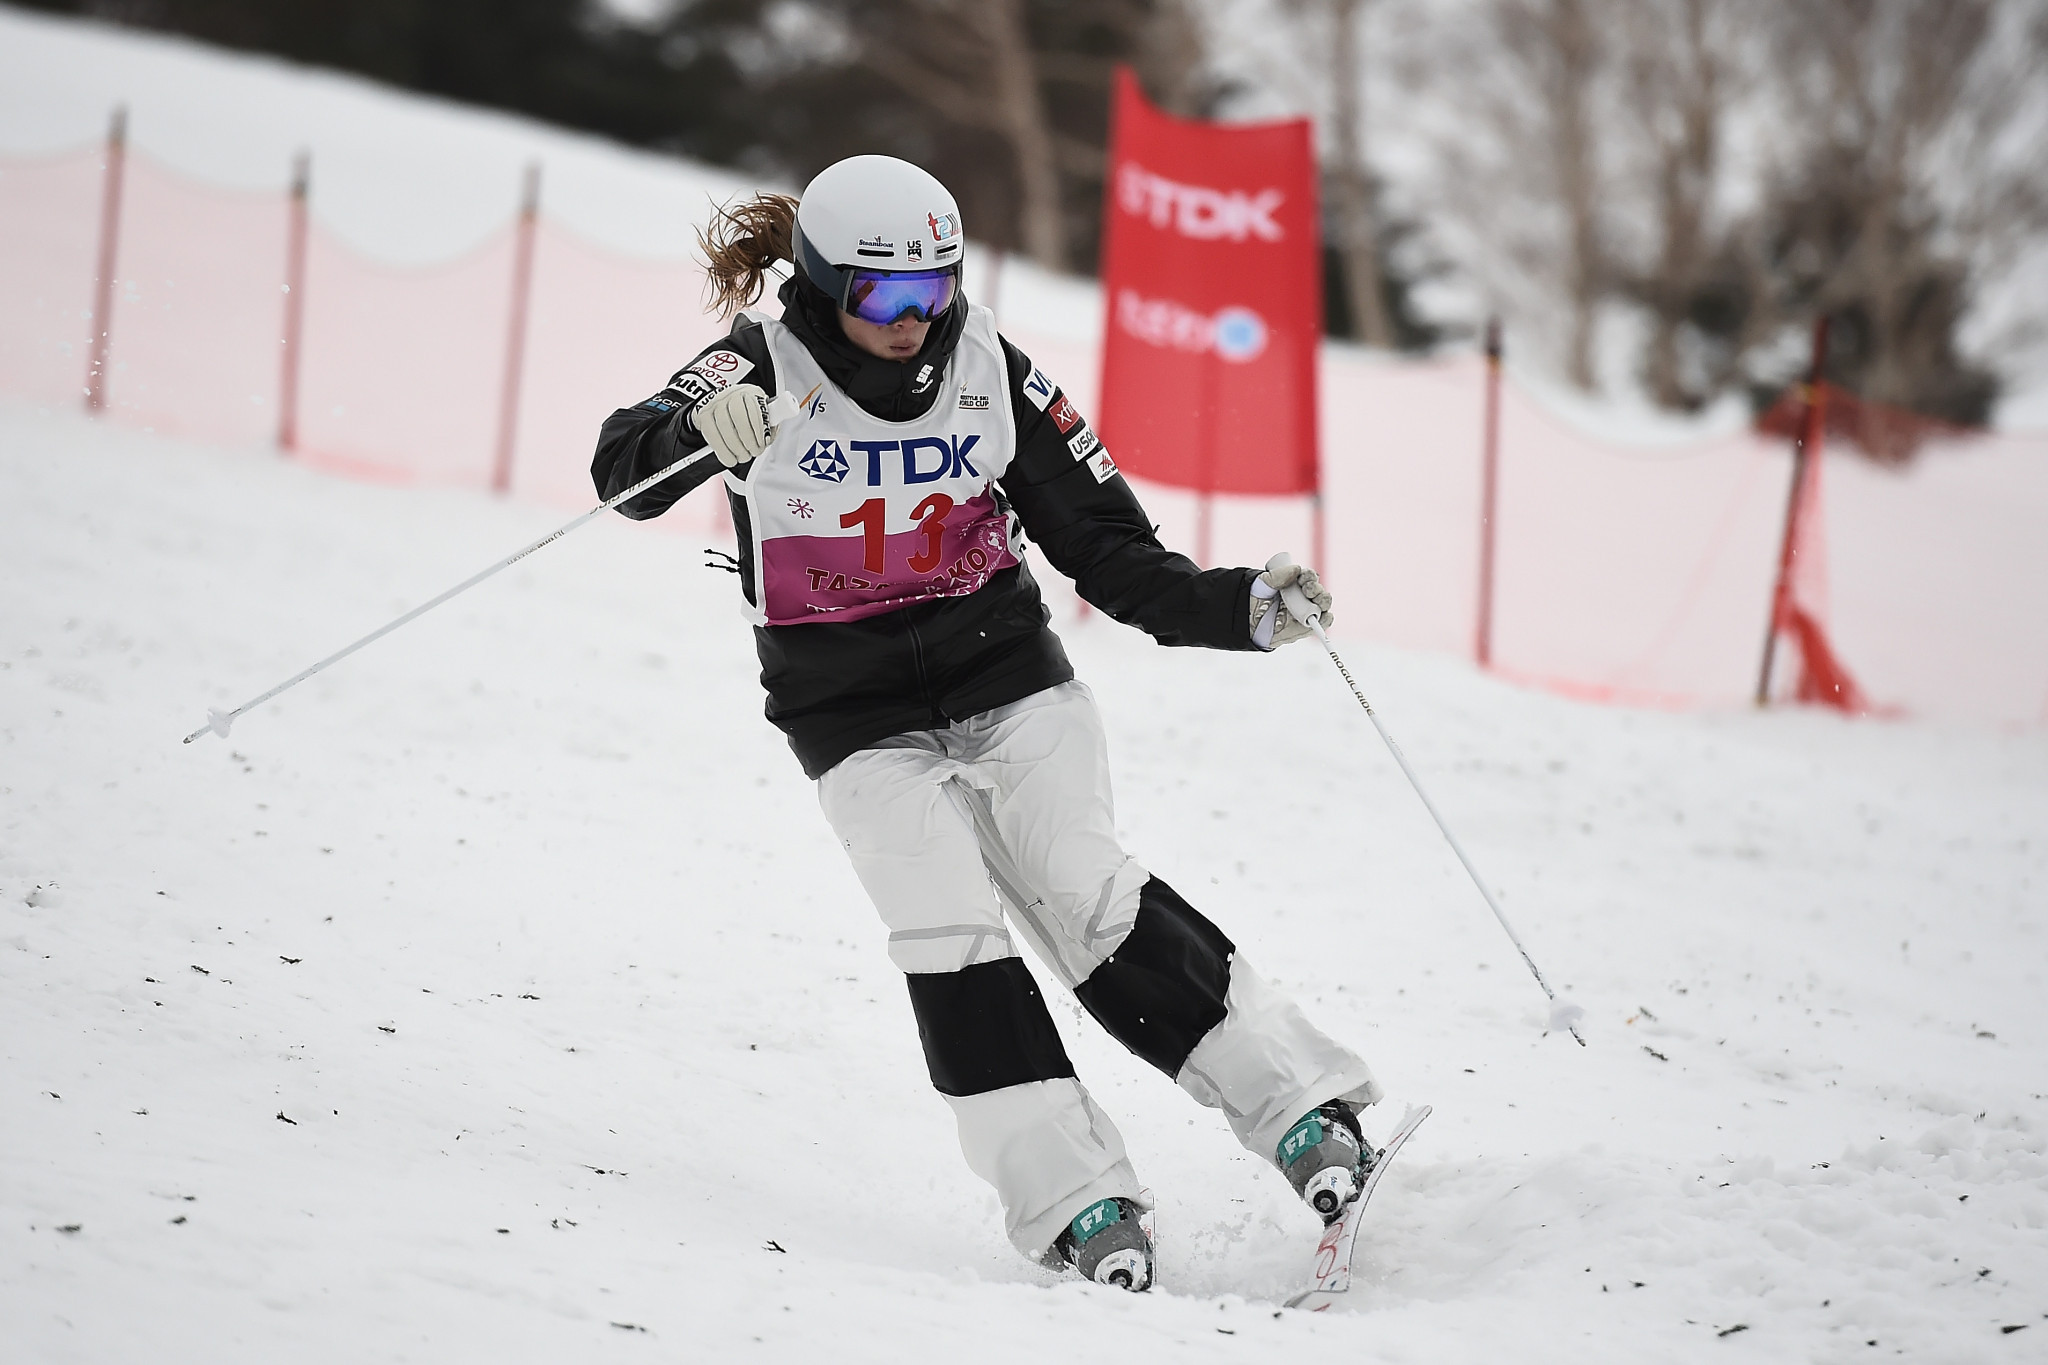 Olivia Giaccio of the United States won a first career women's moguls World Cup victory at Ruka last weekend ©Getty Images